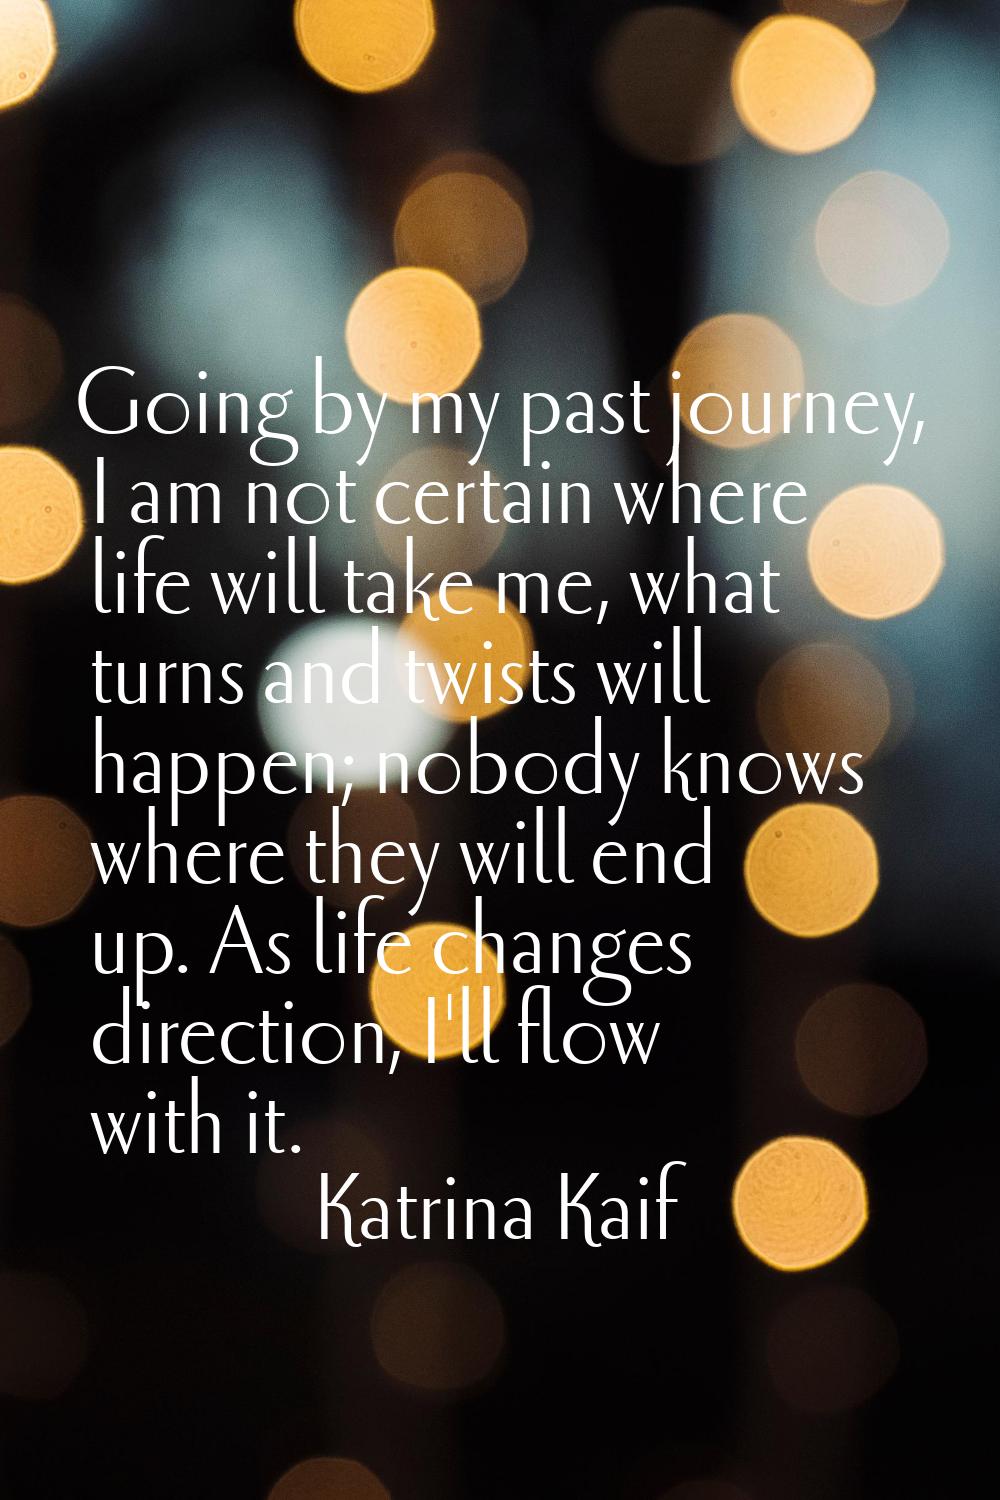 Going by my past journey, I am not certain where life will take me, what turns and twists will happ